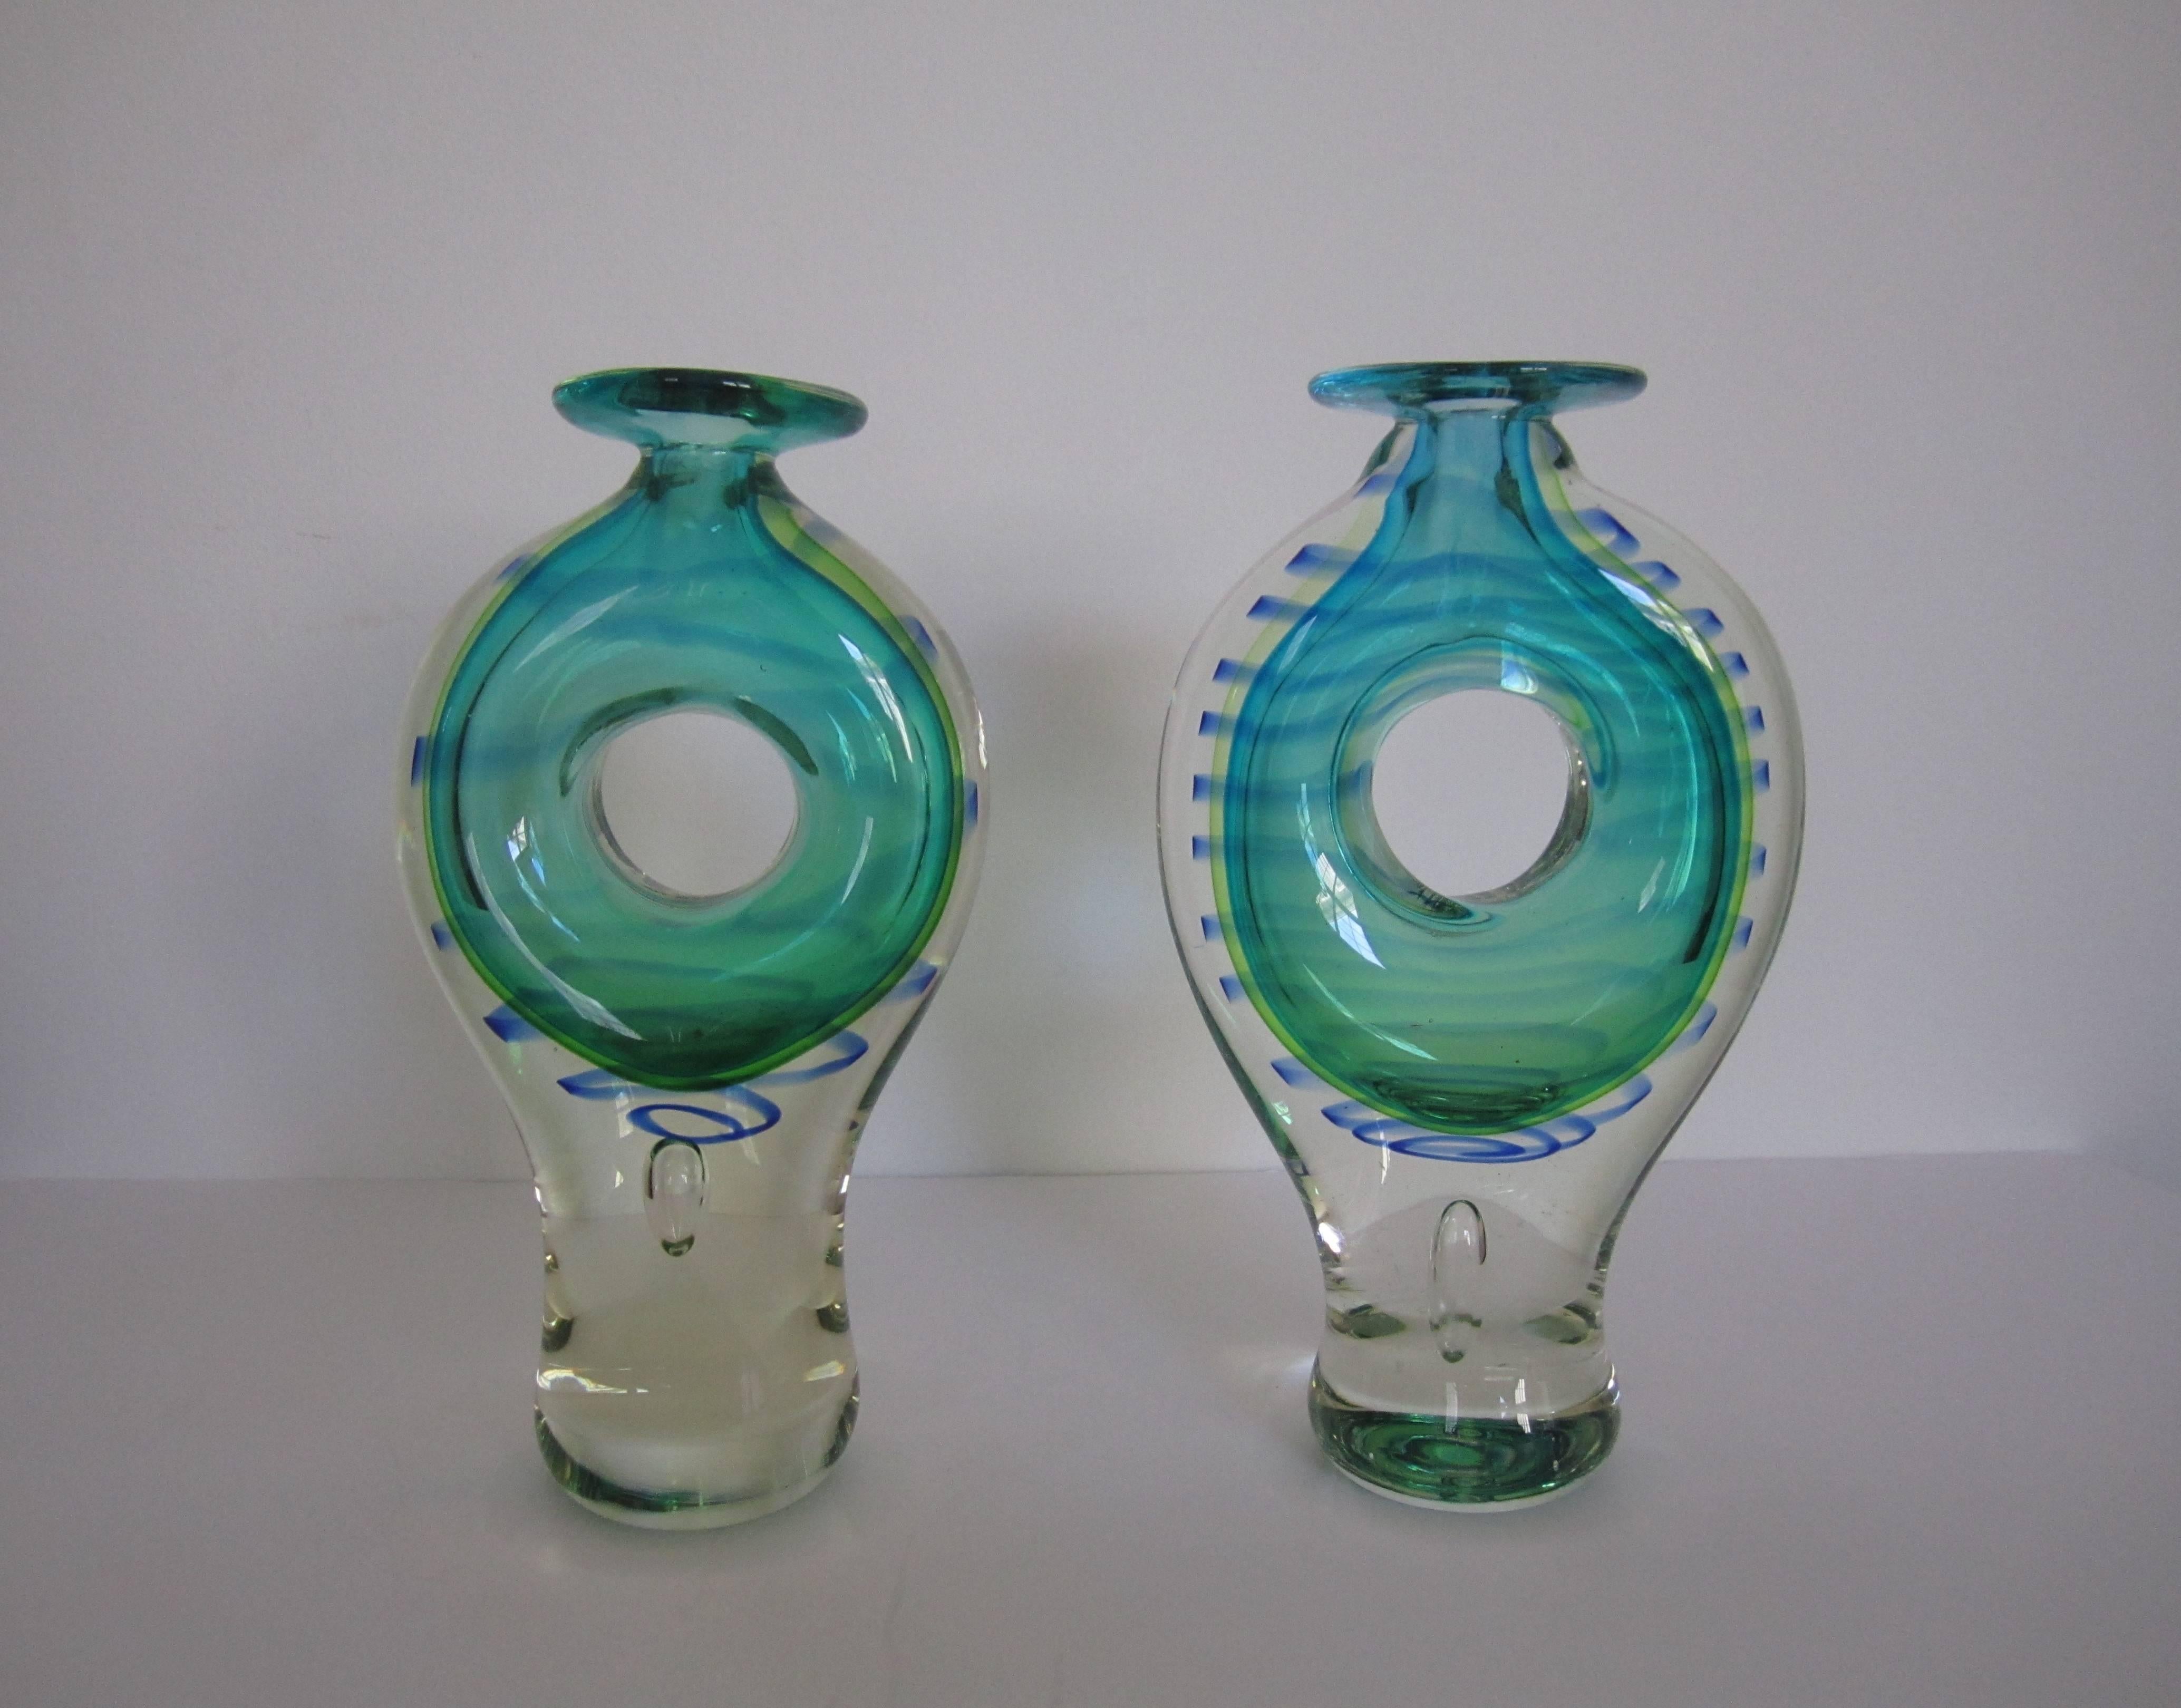 Post-Modern Pair of Modern Blue and Green Art Glass Vessels or Vases